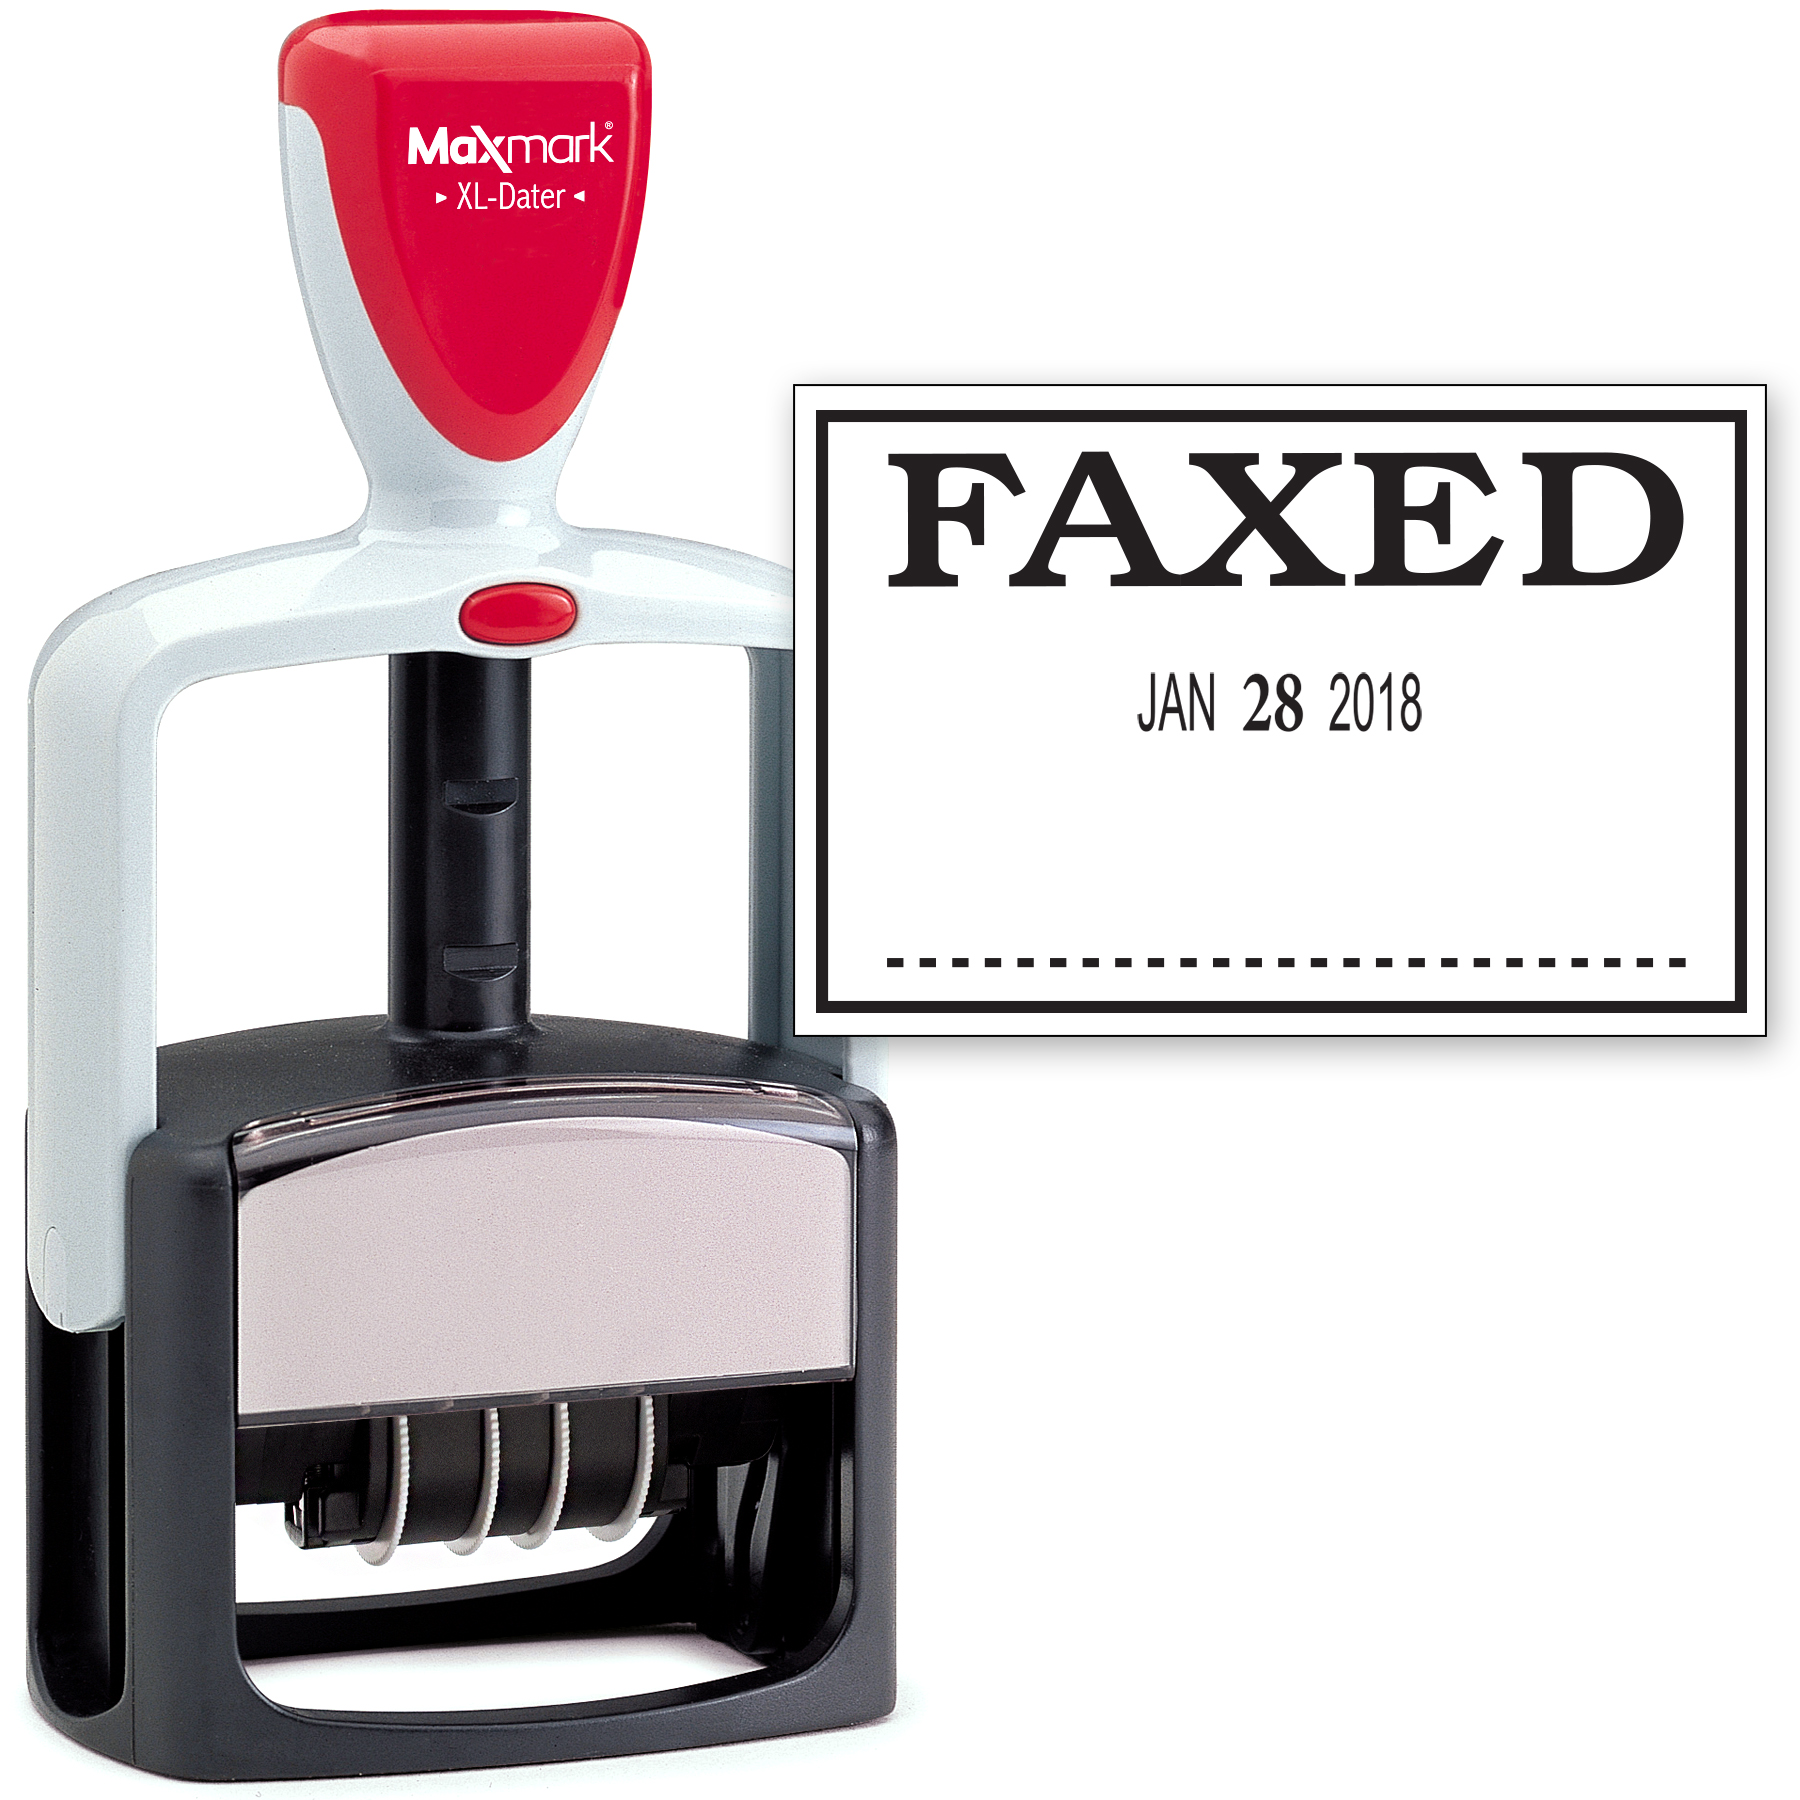 2000 PLUS Heavy Duty Style 2-Color Date Stamp with FAXED self inking stamp - Black Ink